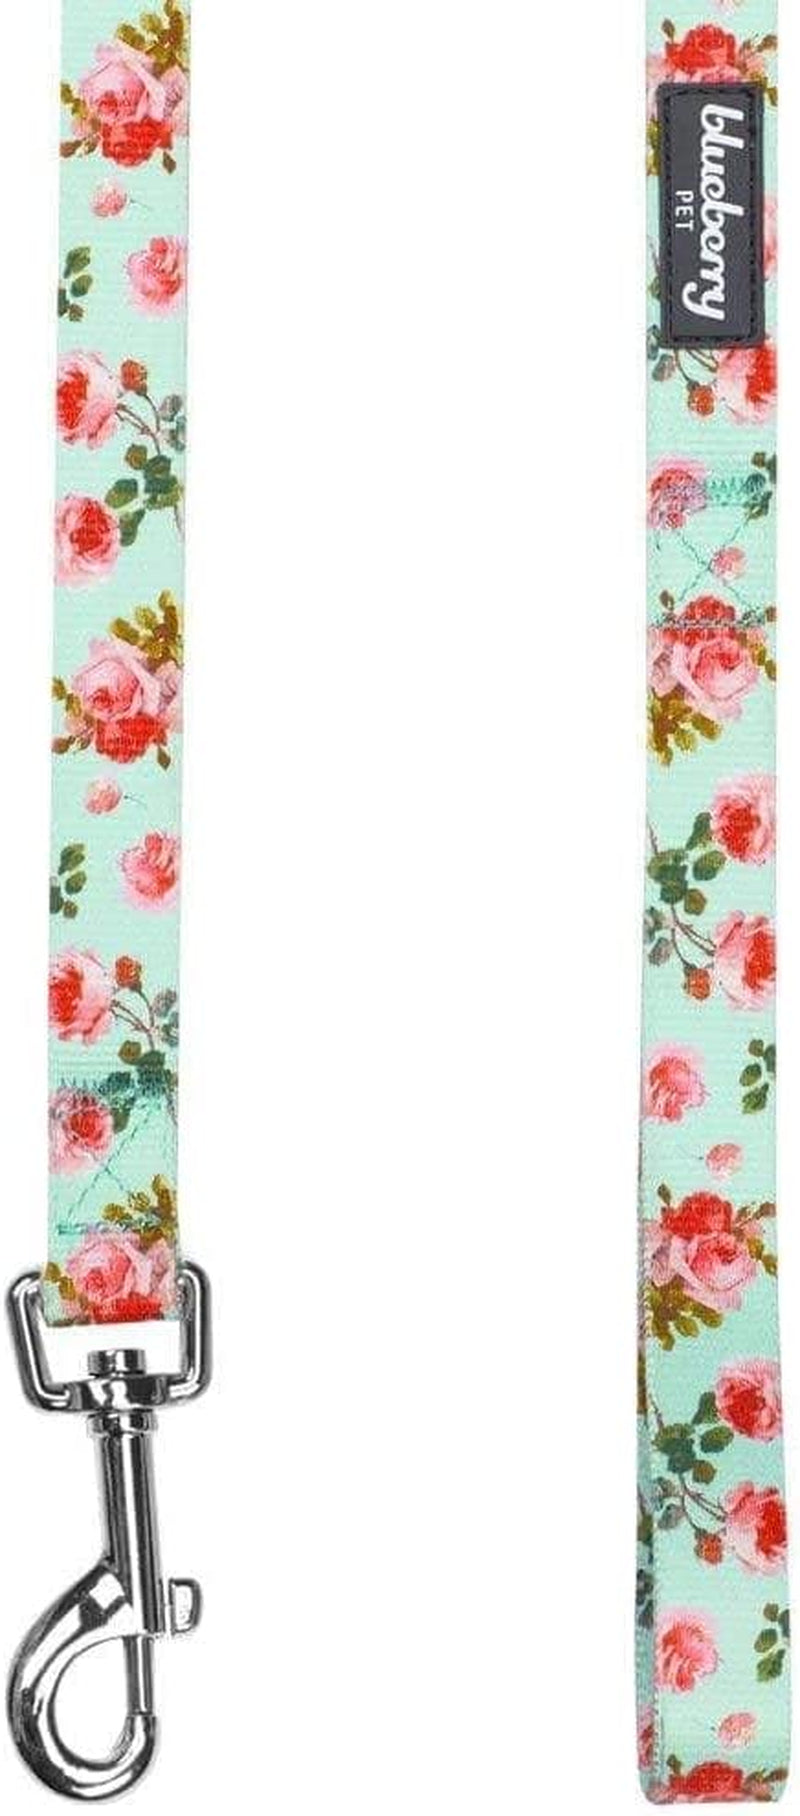 Durable Spring Scent Inspired Floral Rose Print Turquoise Dog Leash 5 Ft X 5/8", Small